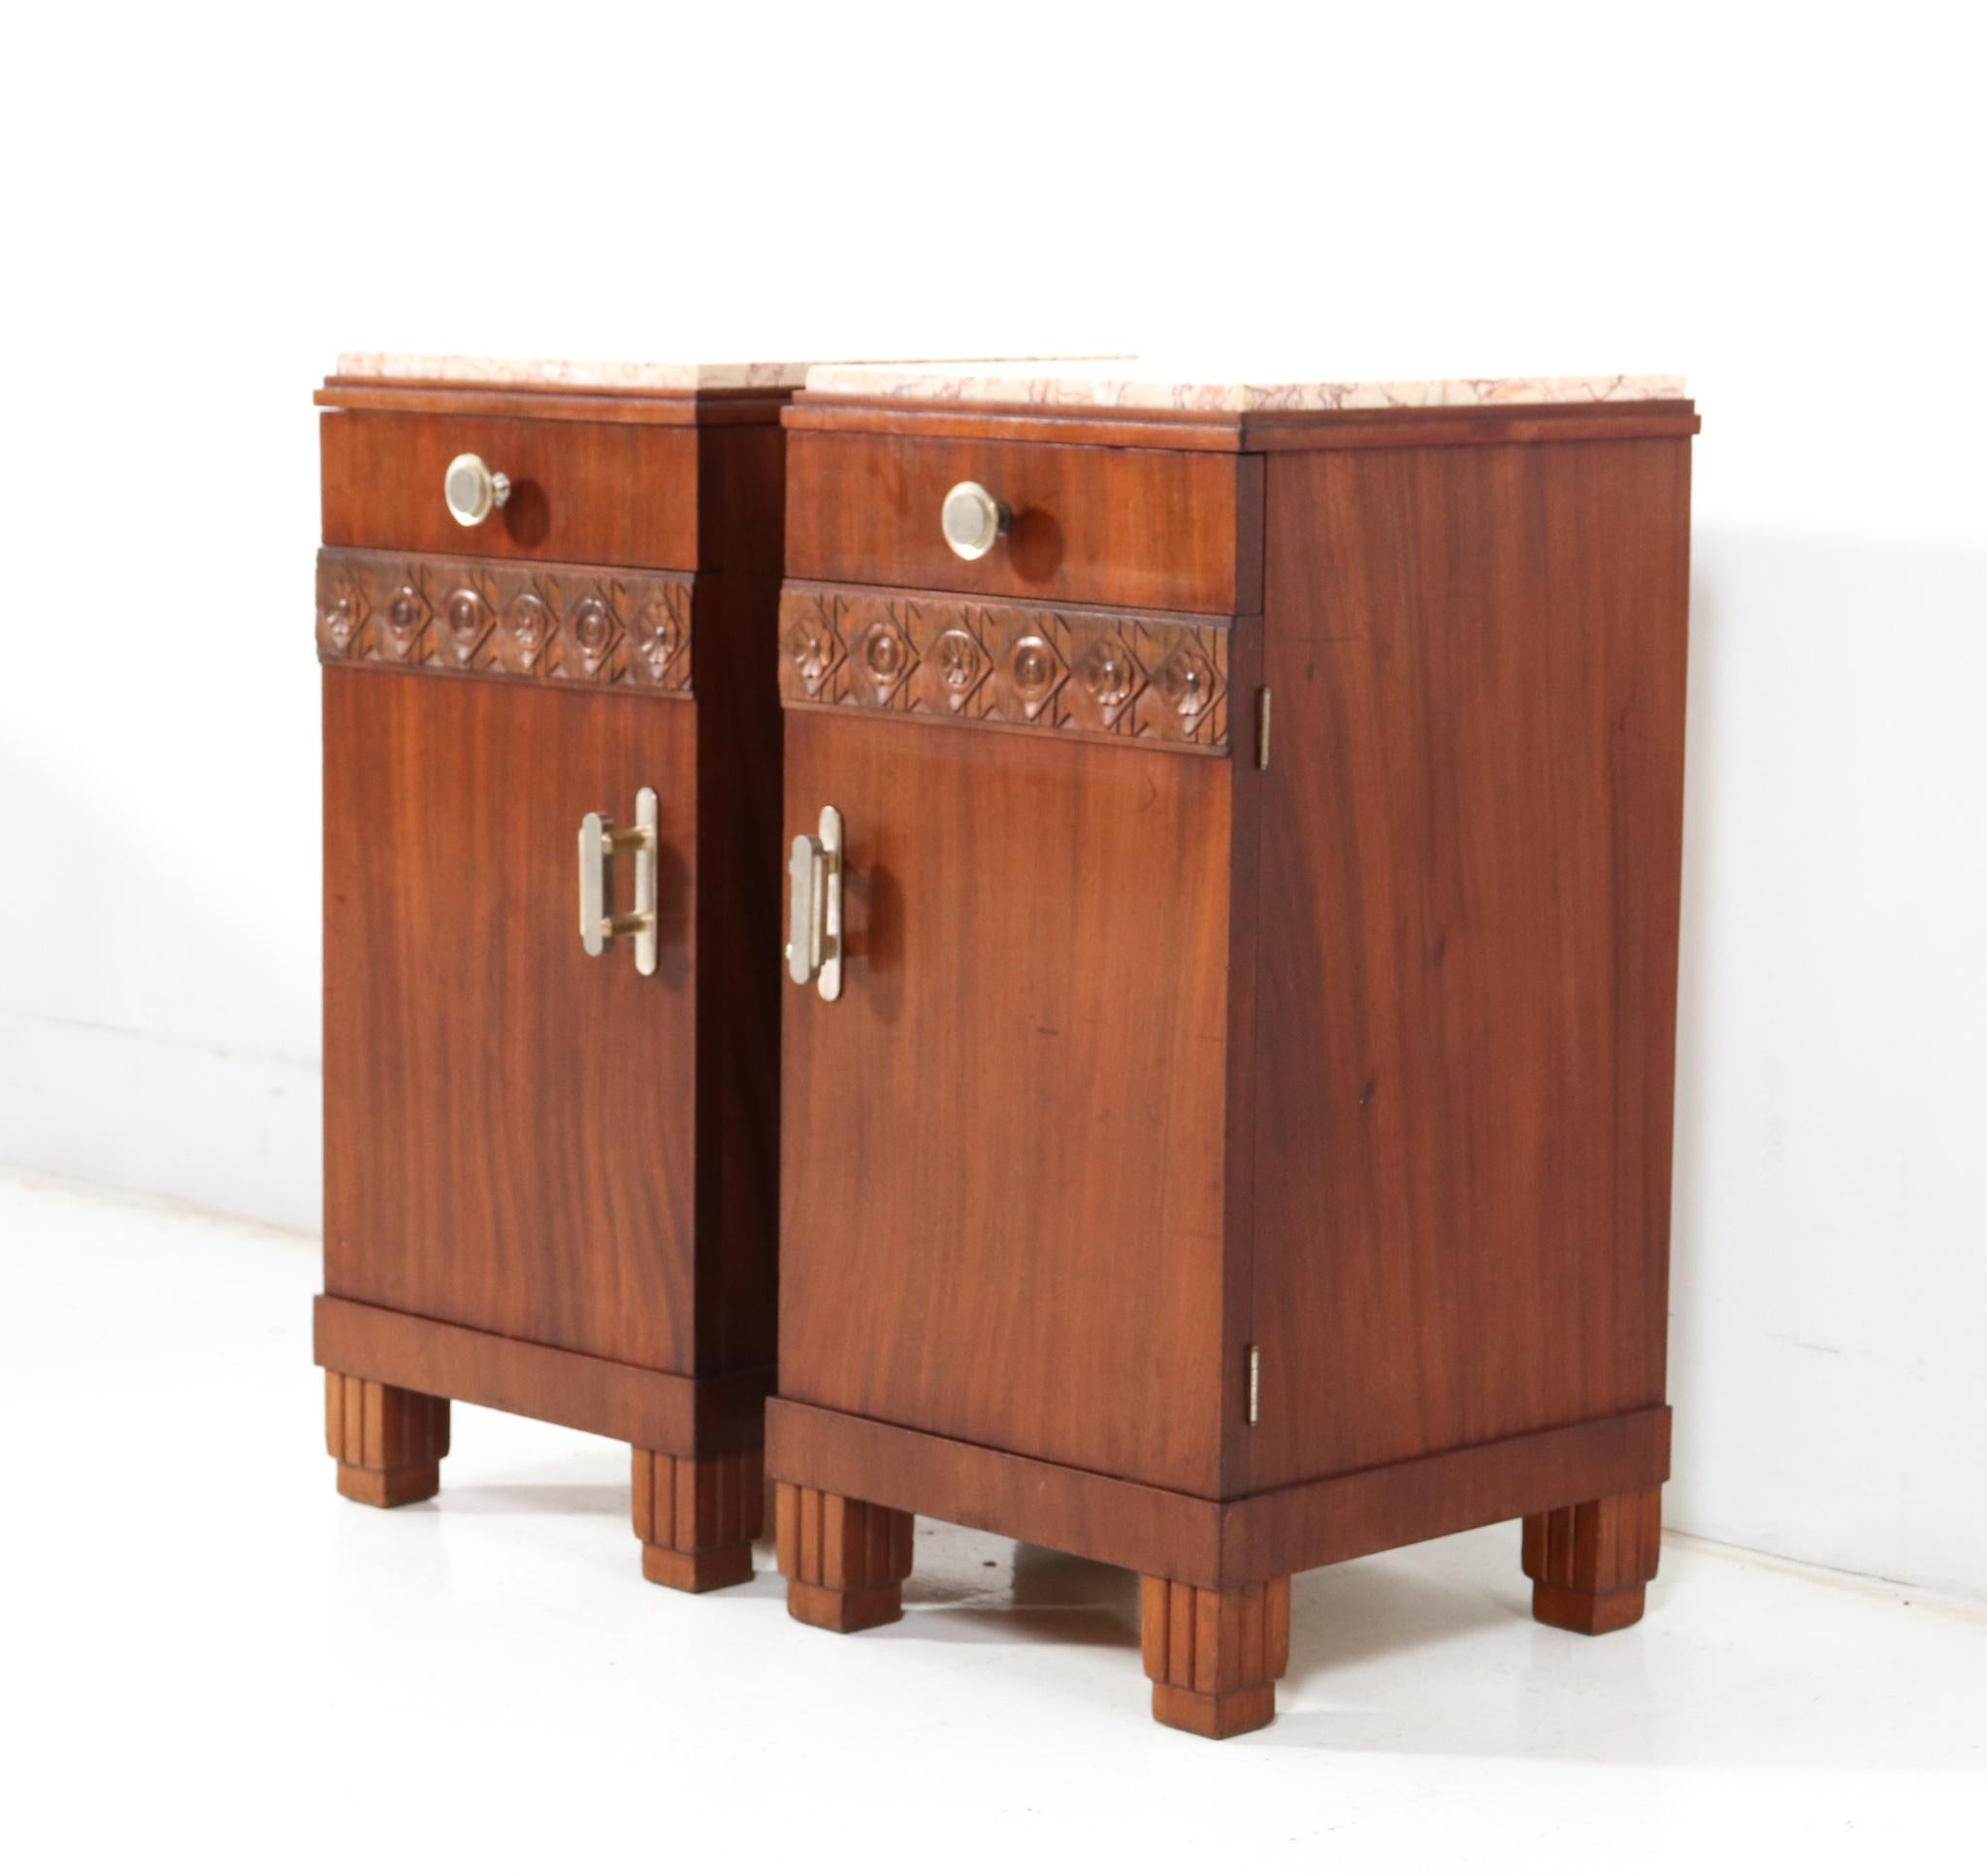 Chrome Two Walnut Art Deco Nightstands or Bedside Tables, 1930s